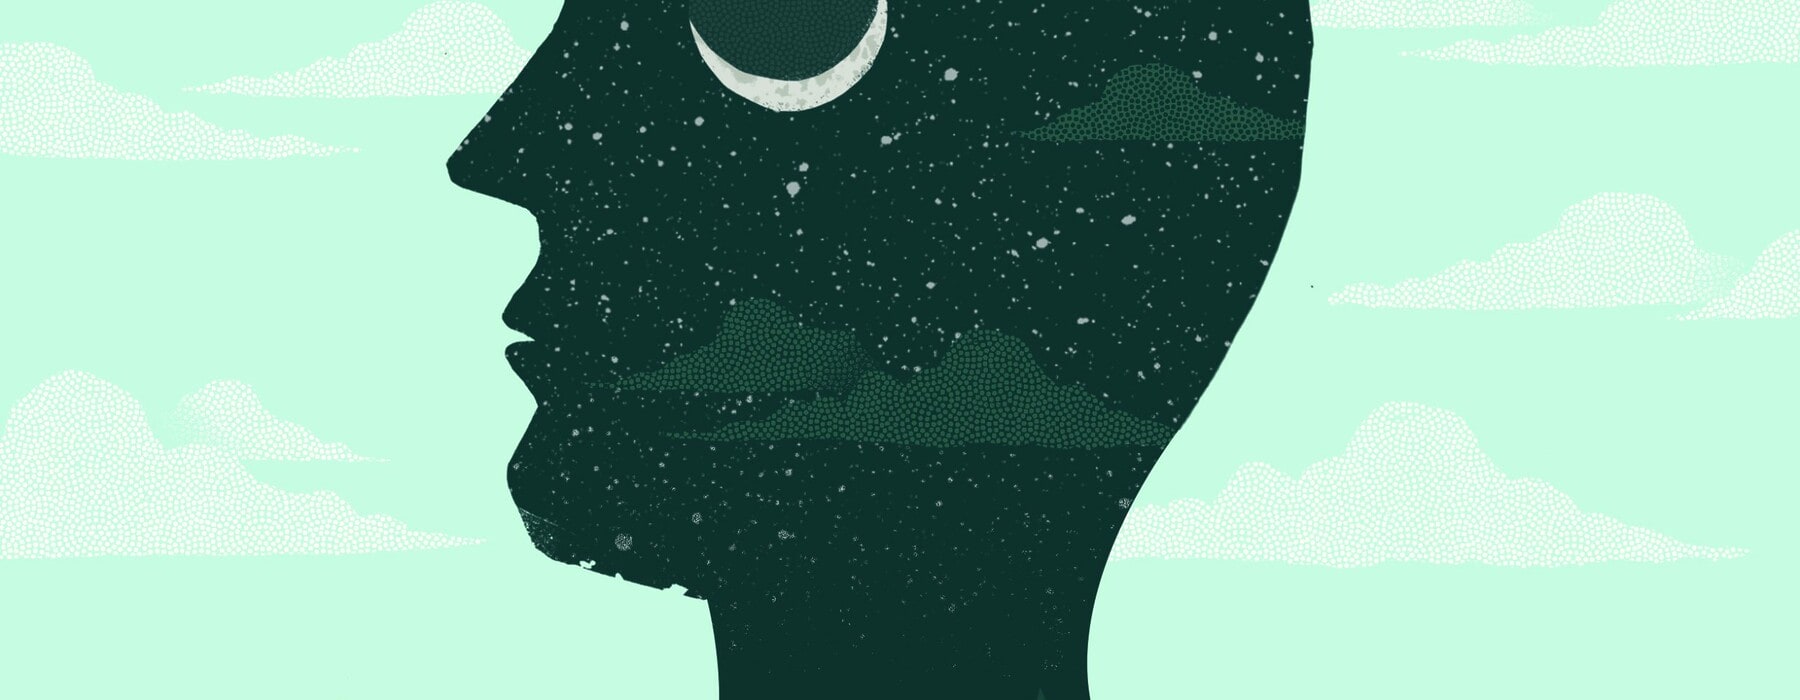 Illustration of man's head outline with night skies and moon behind him